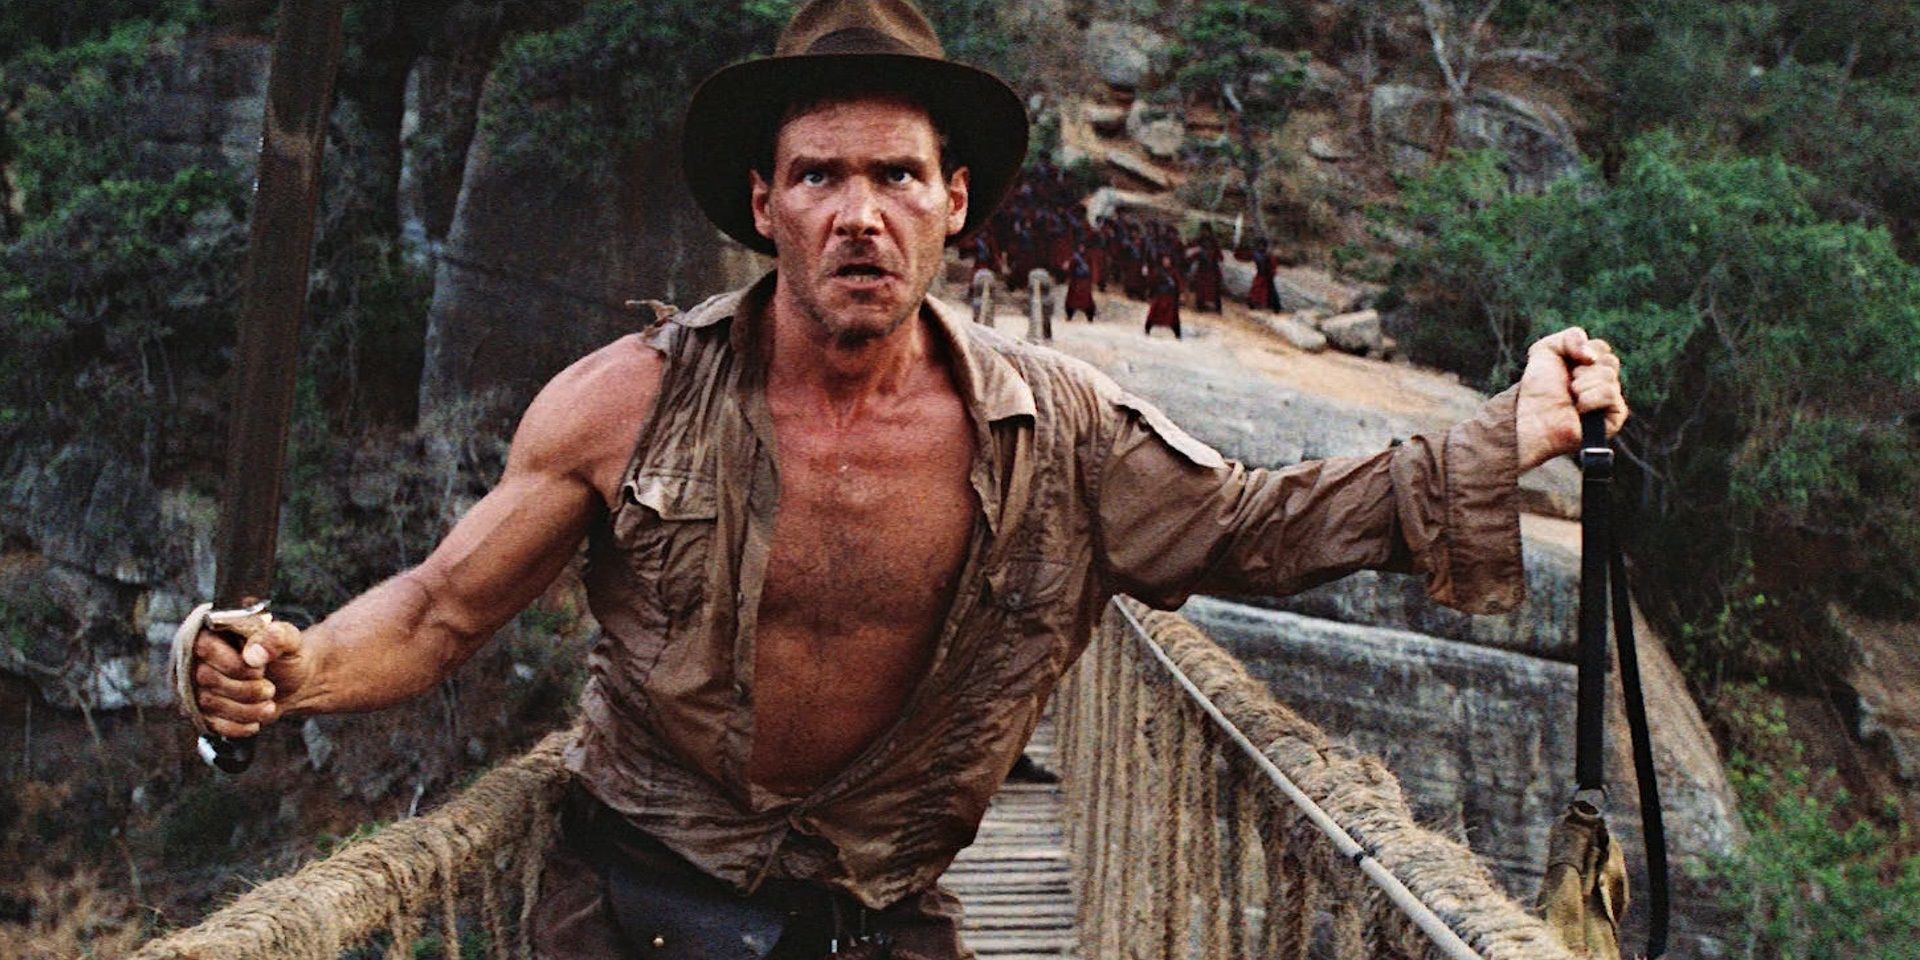 Indiana Jones holds a bag and a sword in Indiana Jones and the Temple of Doom.